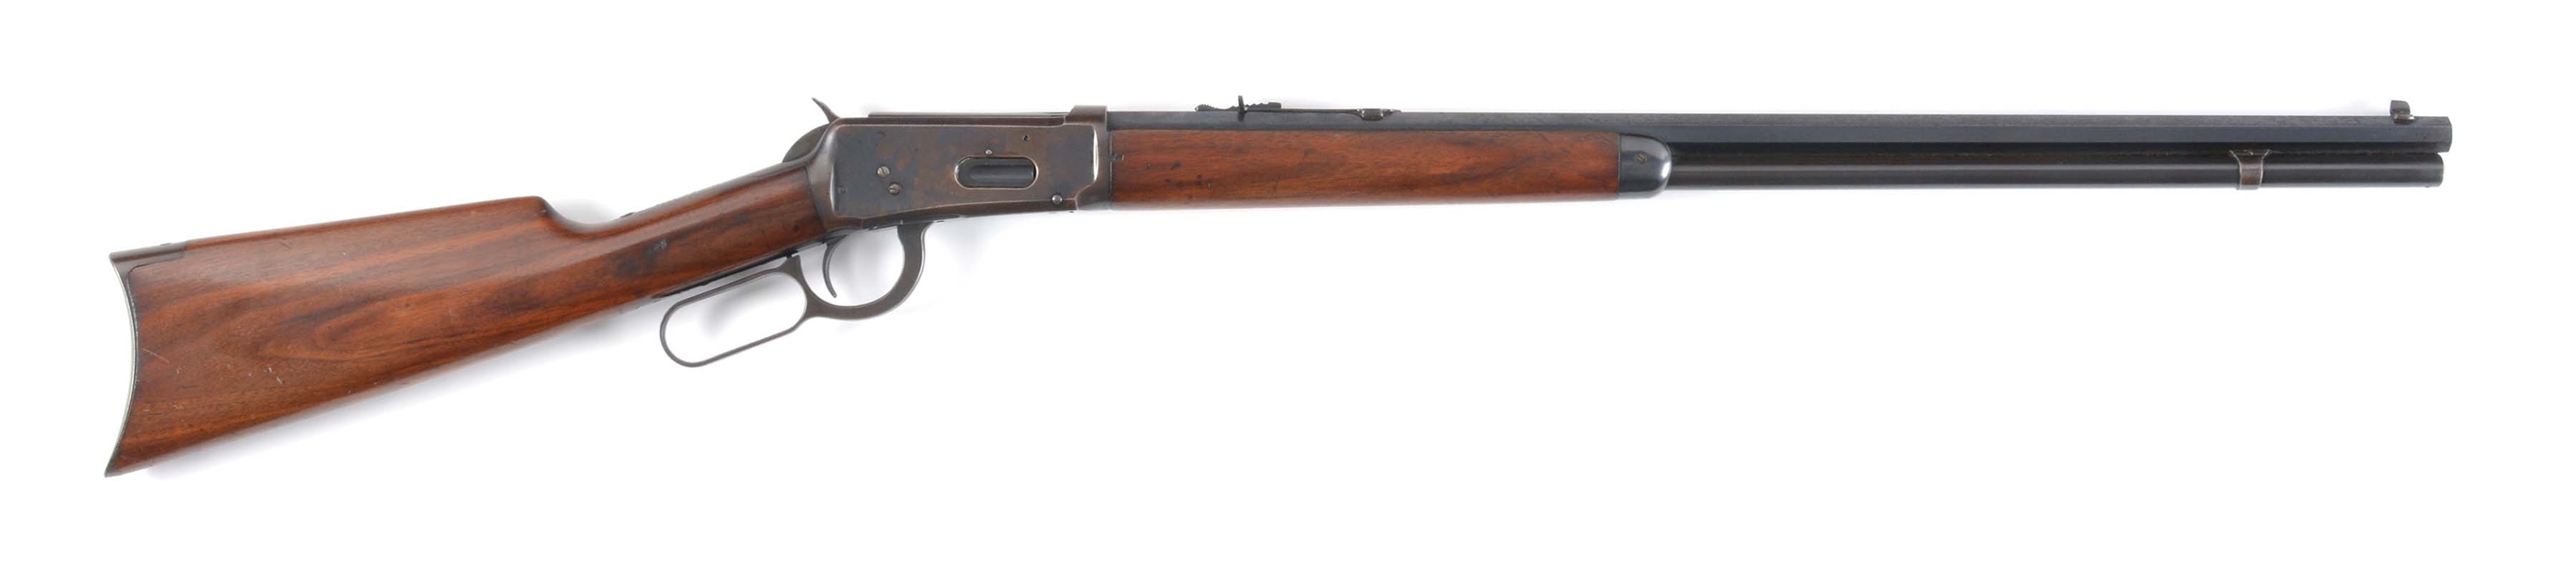 (C) WINCHESTER 1894 .30-30 LEVER ACTION RIFLE (1916)